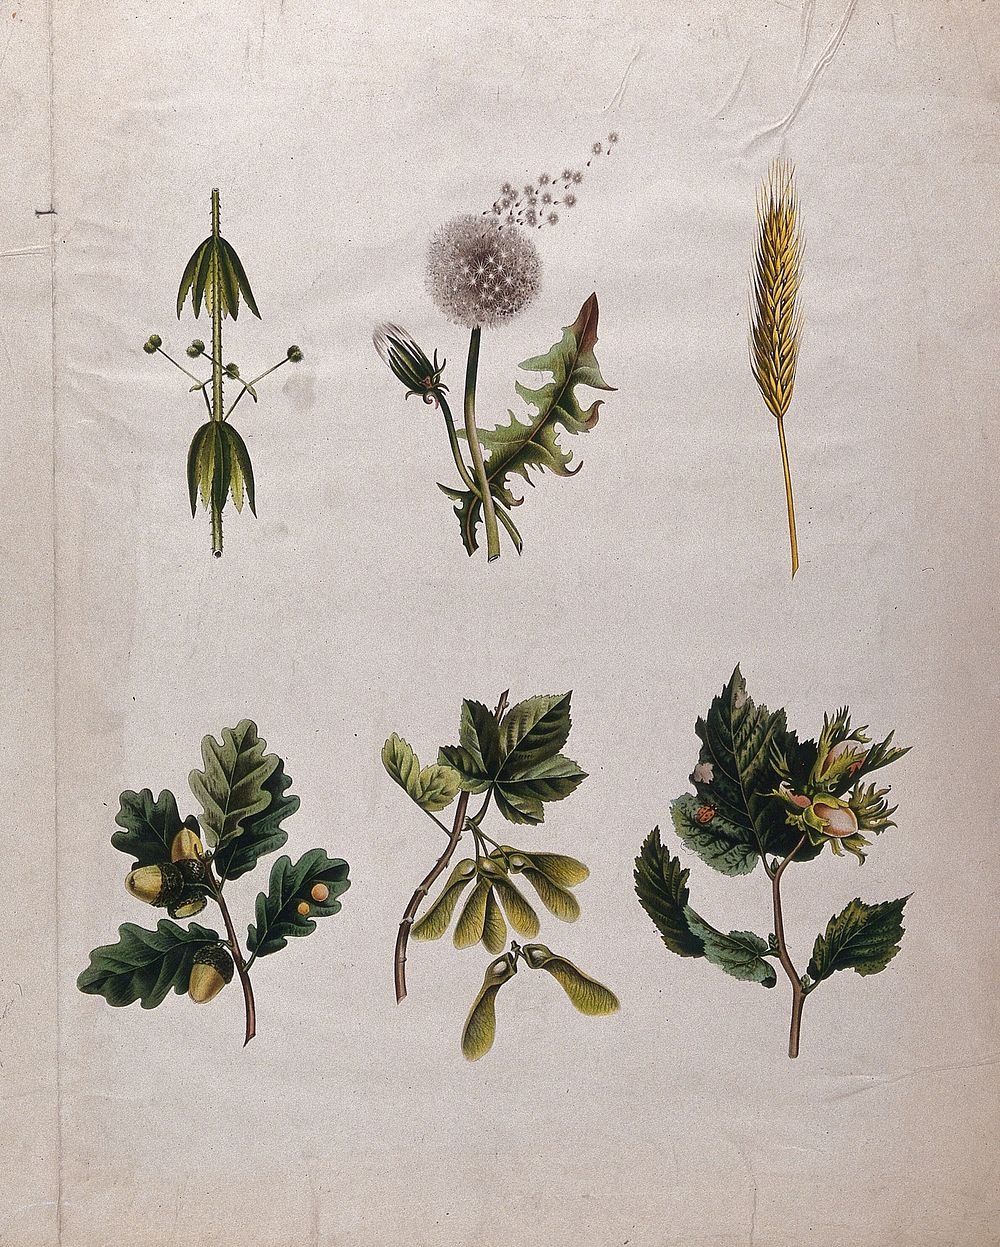 Six seeding plants, including dandelion, oak, sycamore and hazel, all illustrating different methods of seed dispersal.…